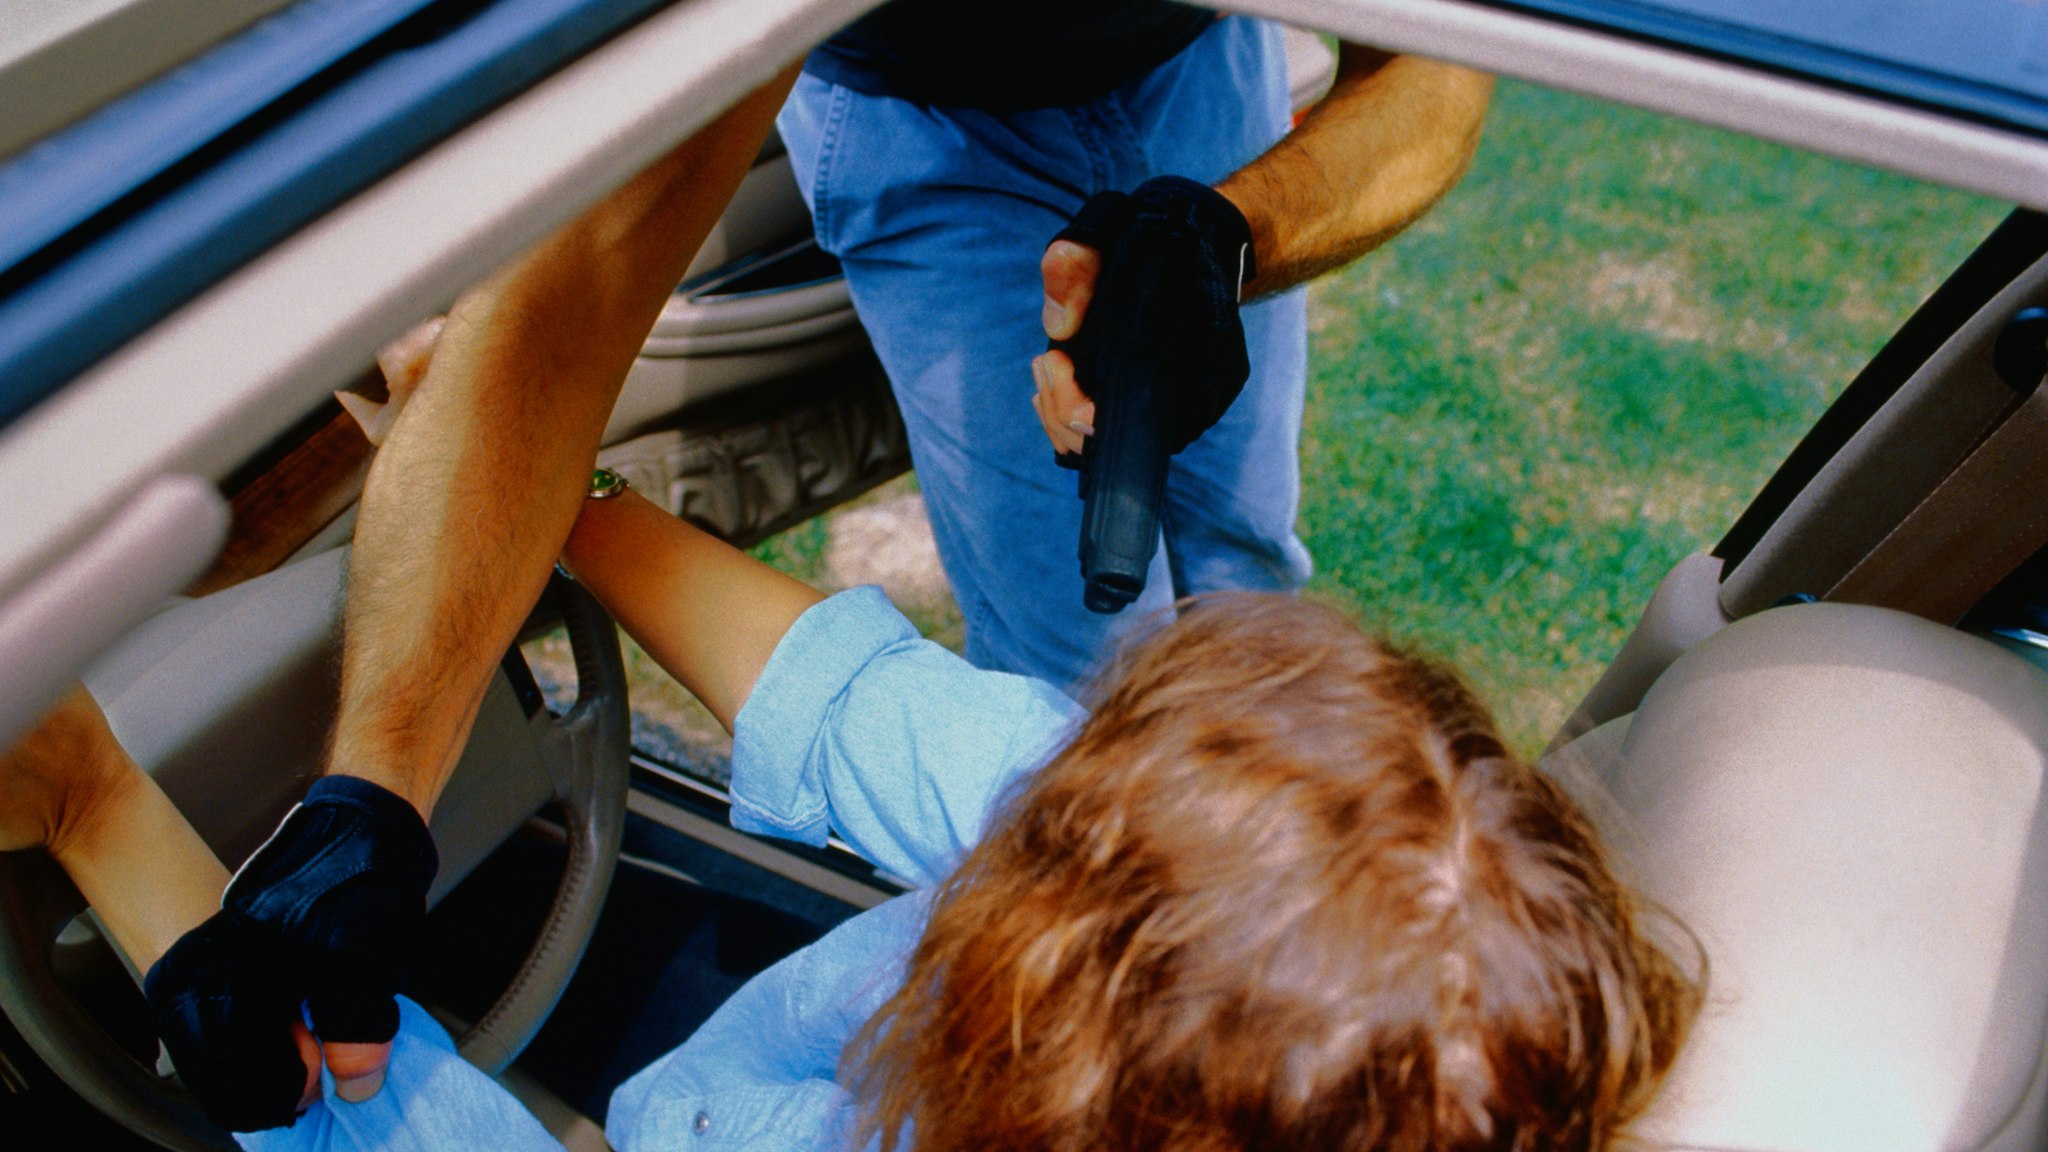 Carjacker forcing woman out of car at gunpoint, view through sun-roof - stock photo